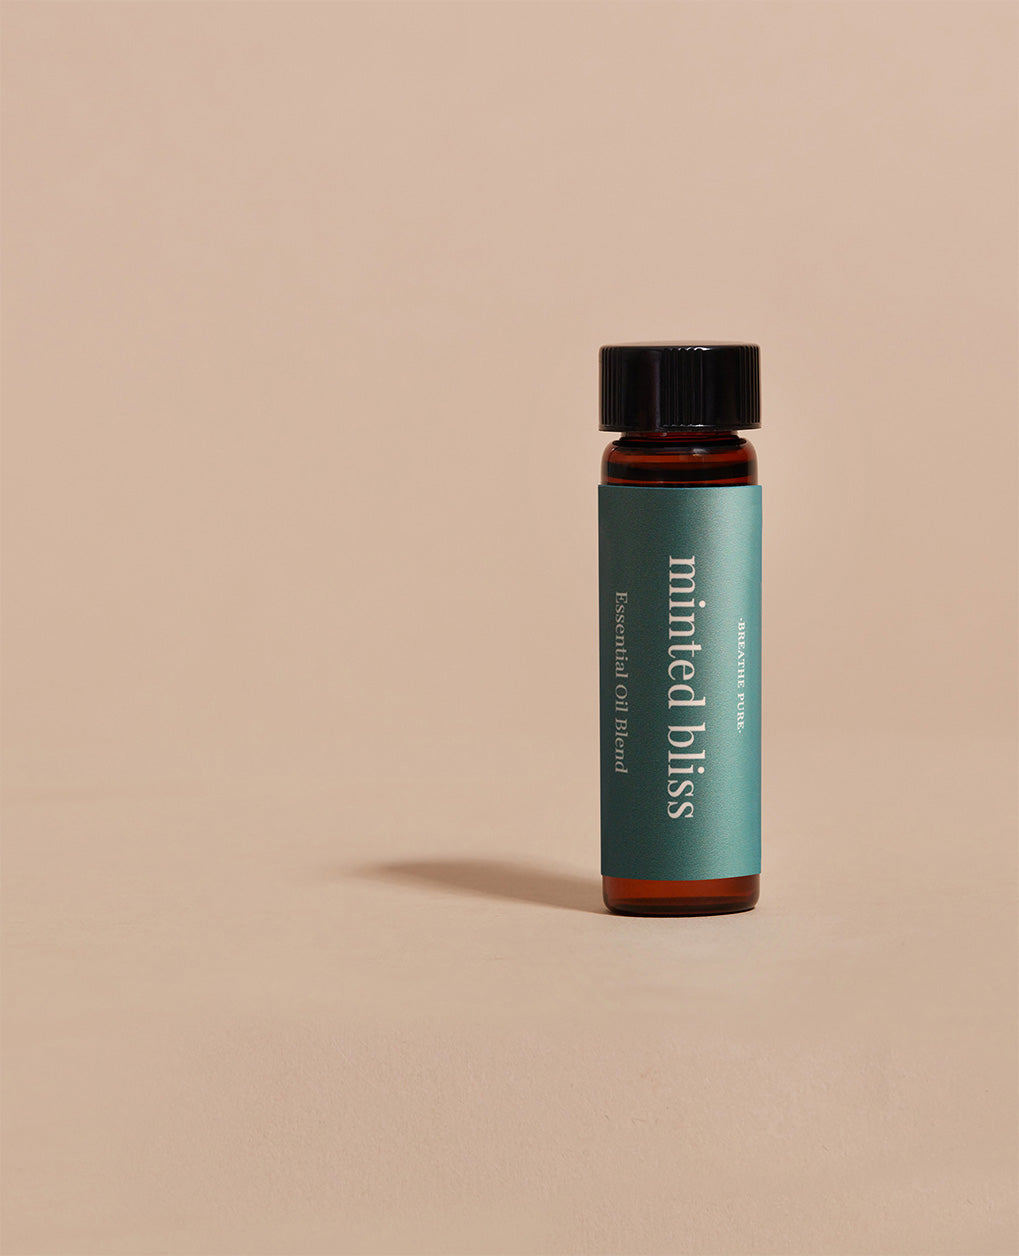 minted bliss diffuser oil